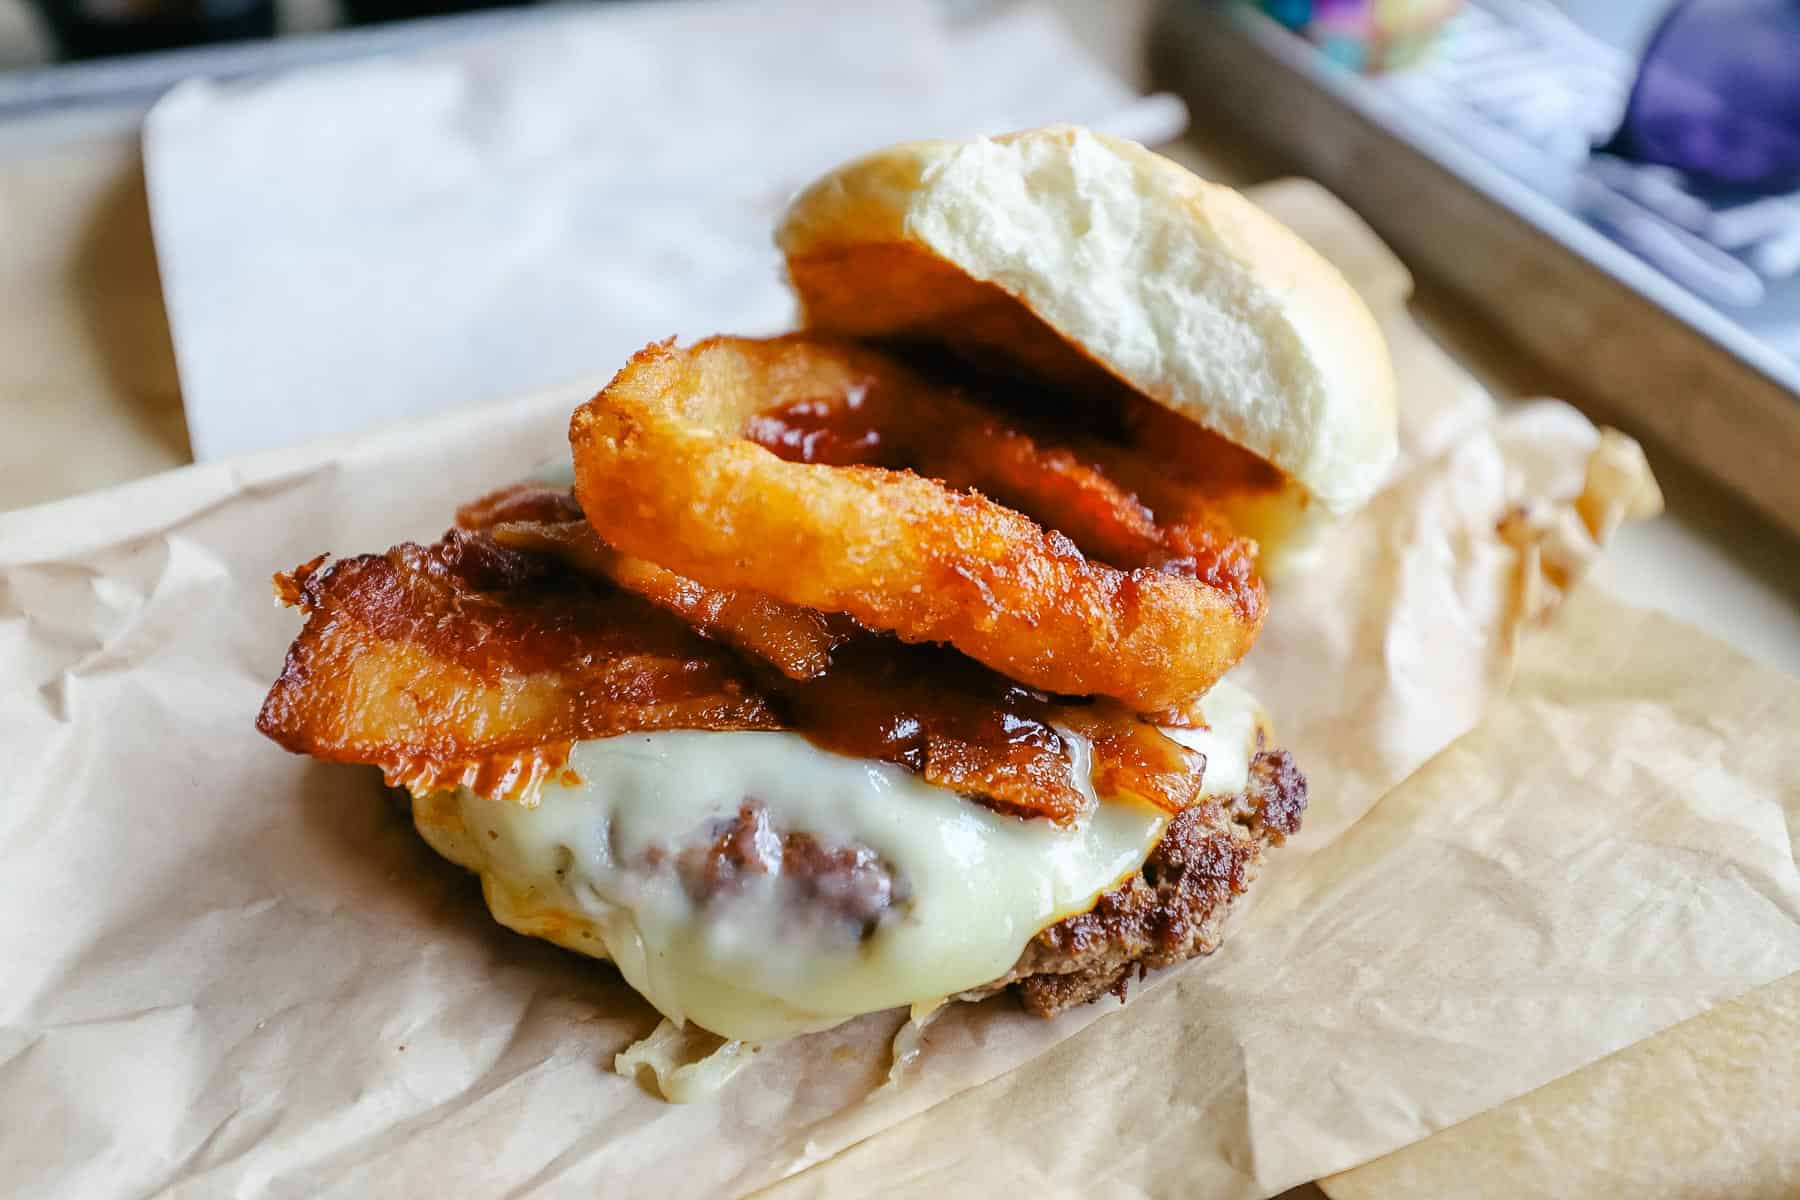 D-luxe Burger's barbecued burger comes with cheese, bacon, onion ring, and barbecue sauce. 